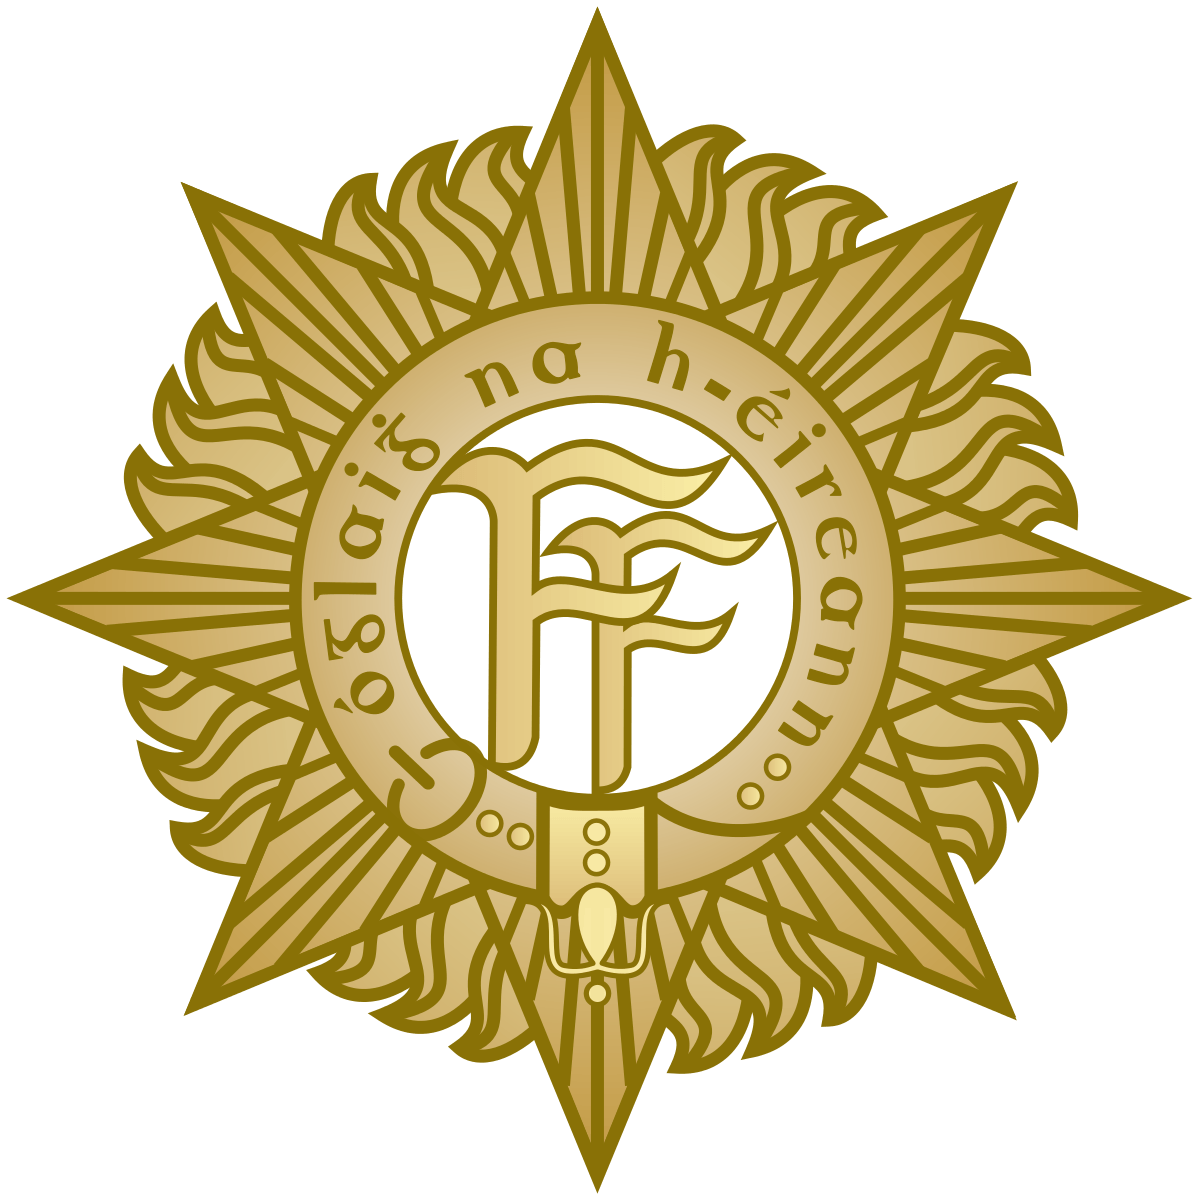 European Military Logo - Statement to the Dáil on the state of the Defence Forces and ...